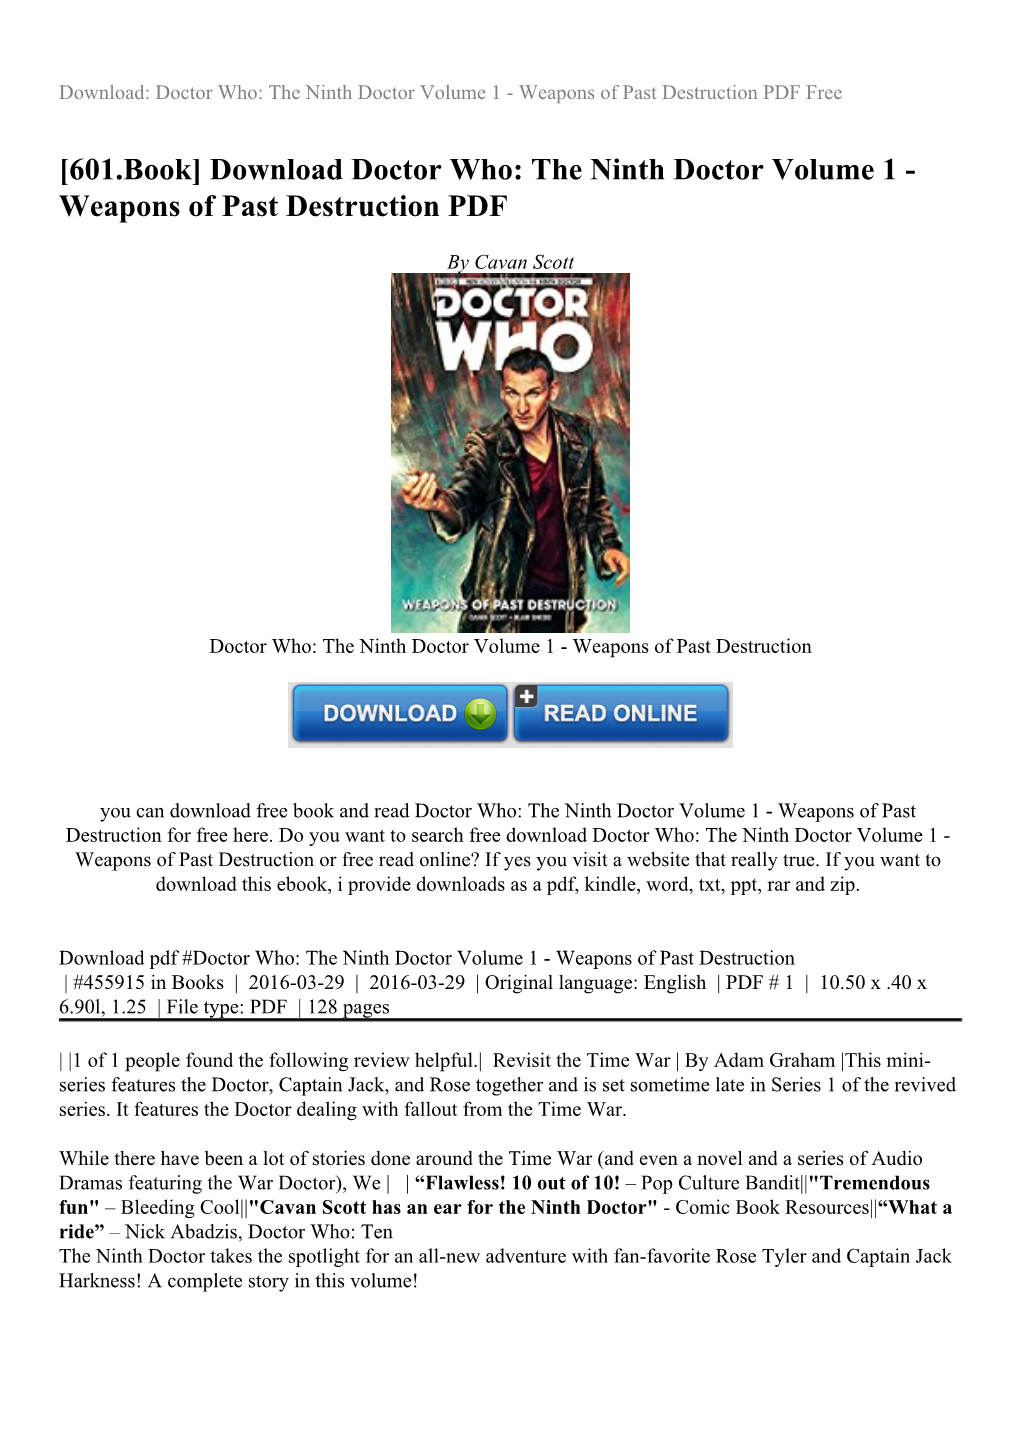 The Ninth Doctor Volume 1 - Weapons of Past Destruction PDF Free